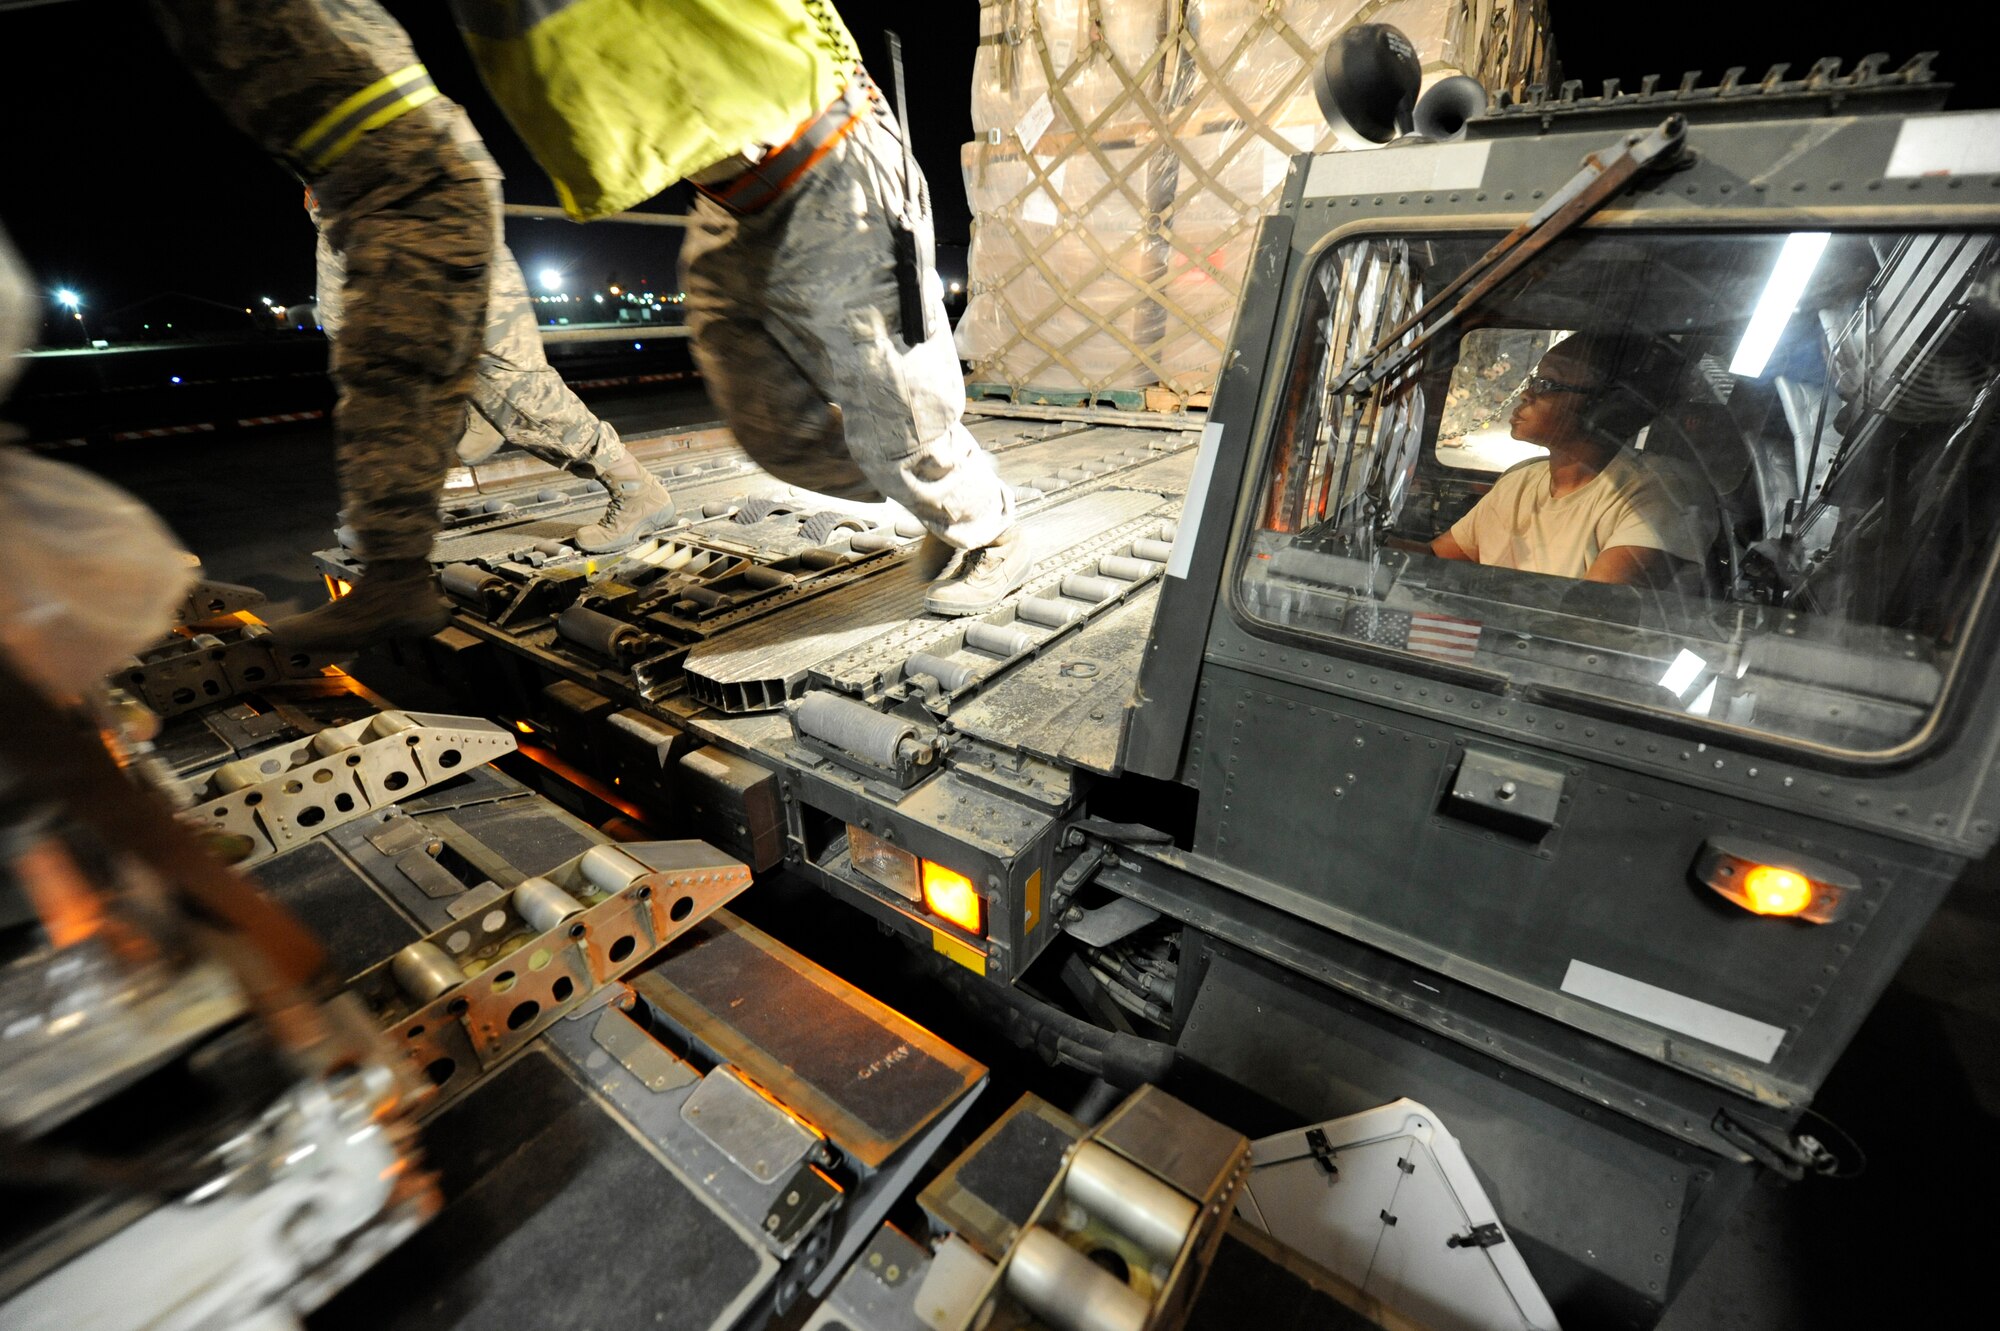 Airman from the 386th Expeditionary Logistics Readiness Squadron and Air Mobility Command work together to load pallets of non-lethal aid on to a C-17 aircraft at an undisclosed base in Southwest Asia Apr 30, 2013. (U.S. Air Force photo/Staff Sgt. Austin Knox)